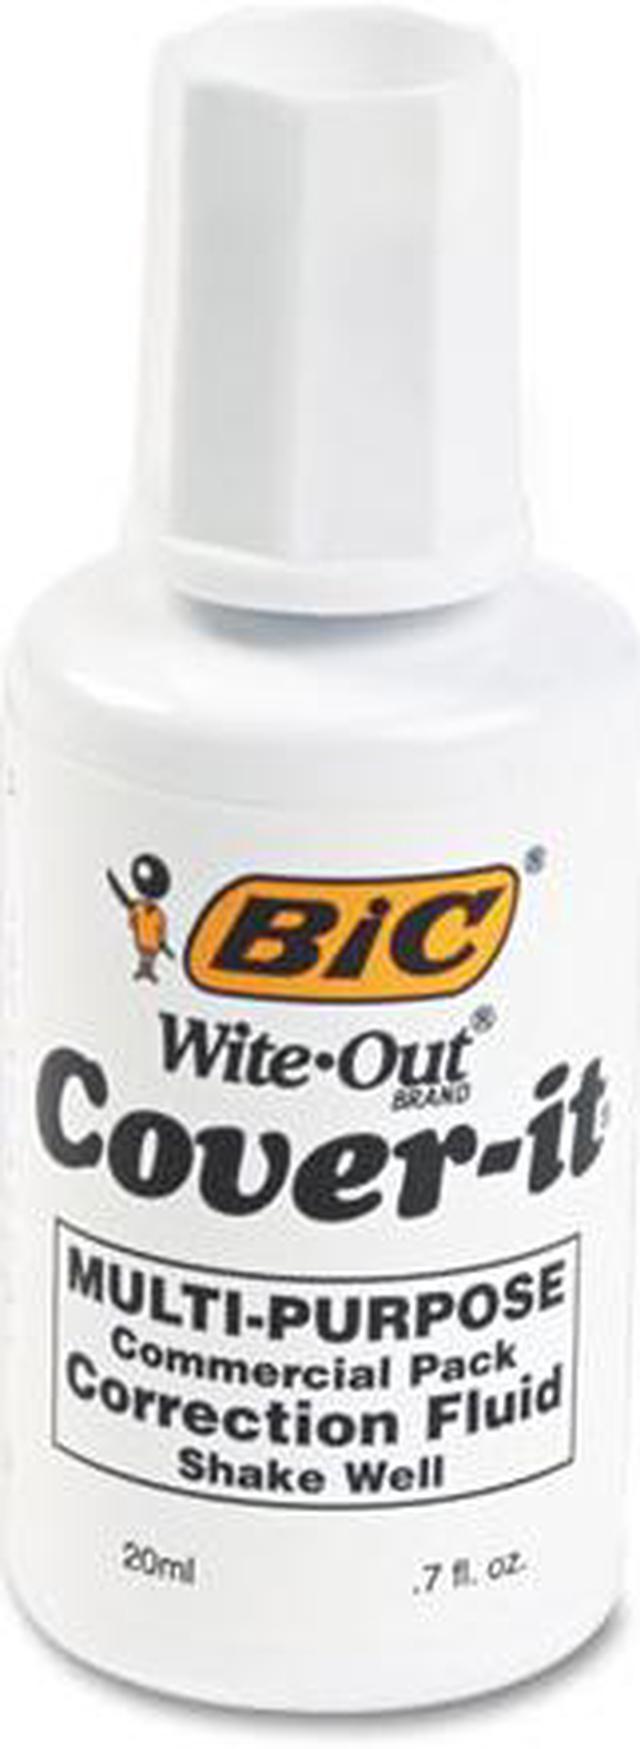 BIC Wite-Out Brand Extra Coverage Correction Fluid, 20 ml, White